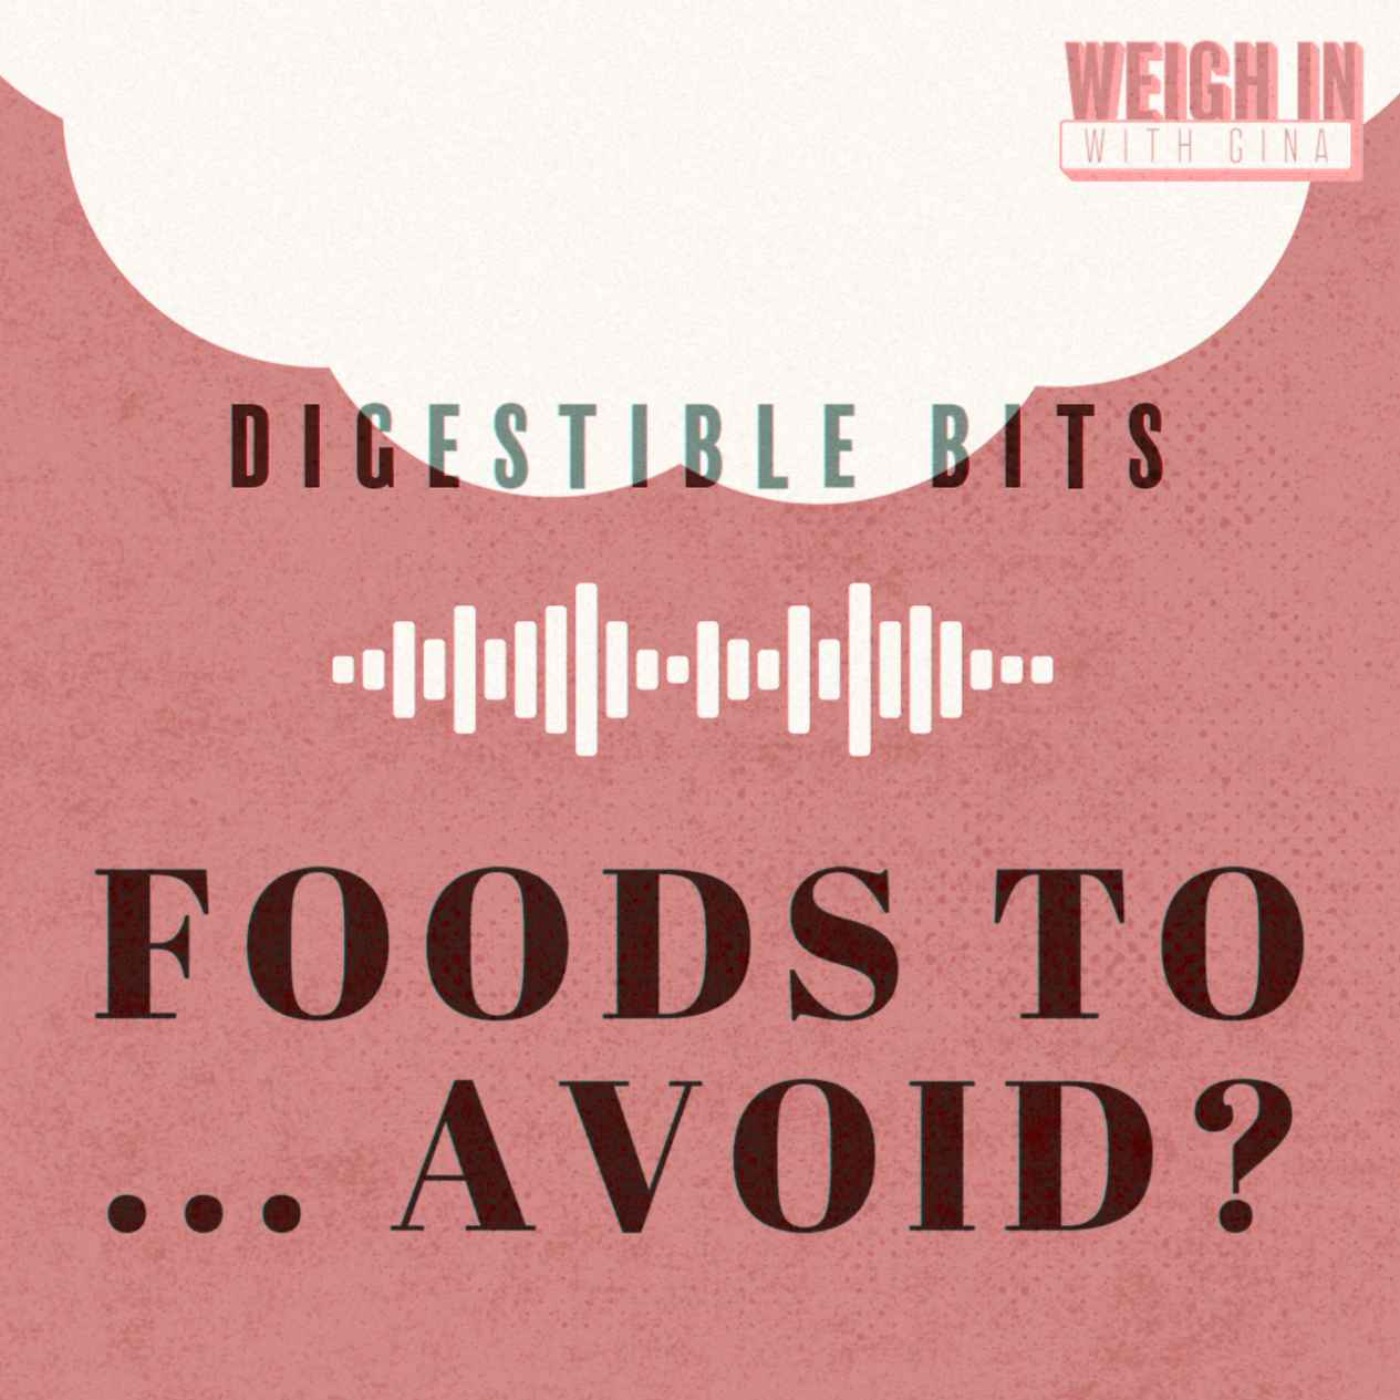 Digestible Bits - Foods to ...Avoid?